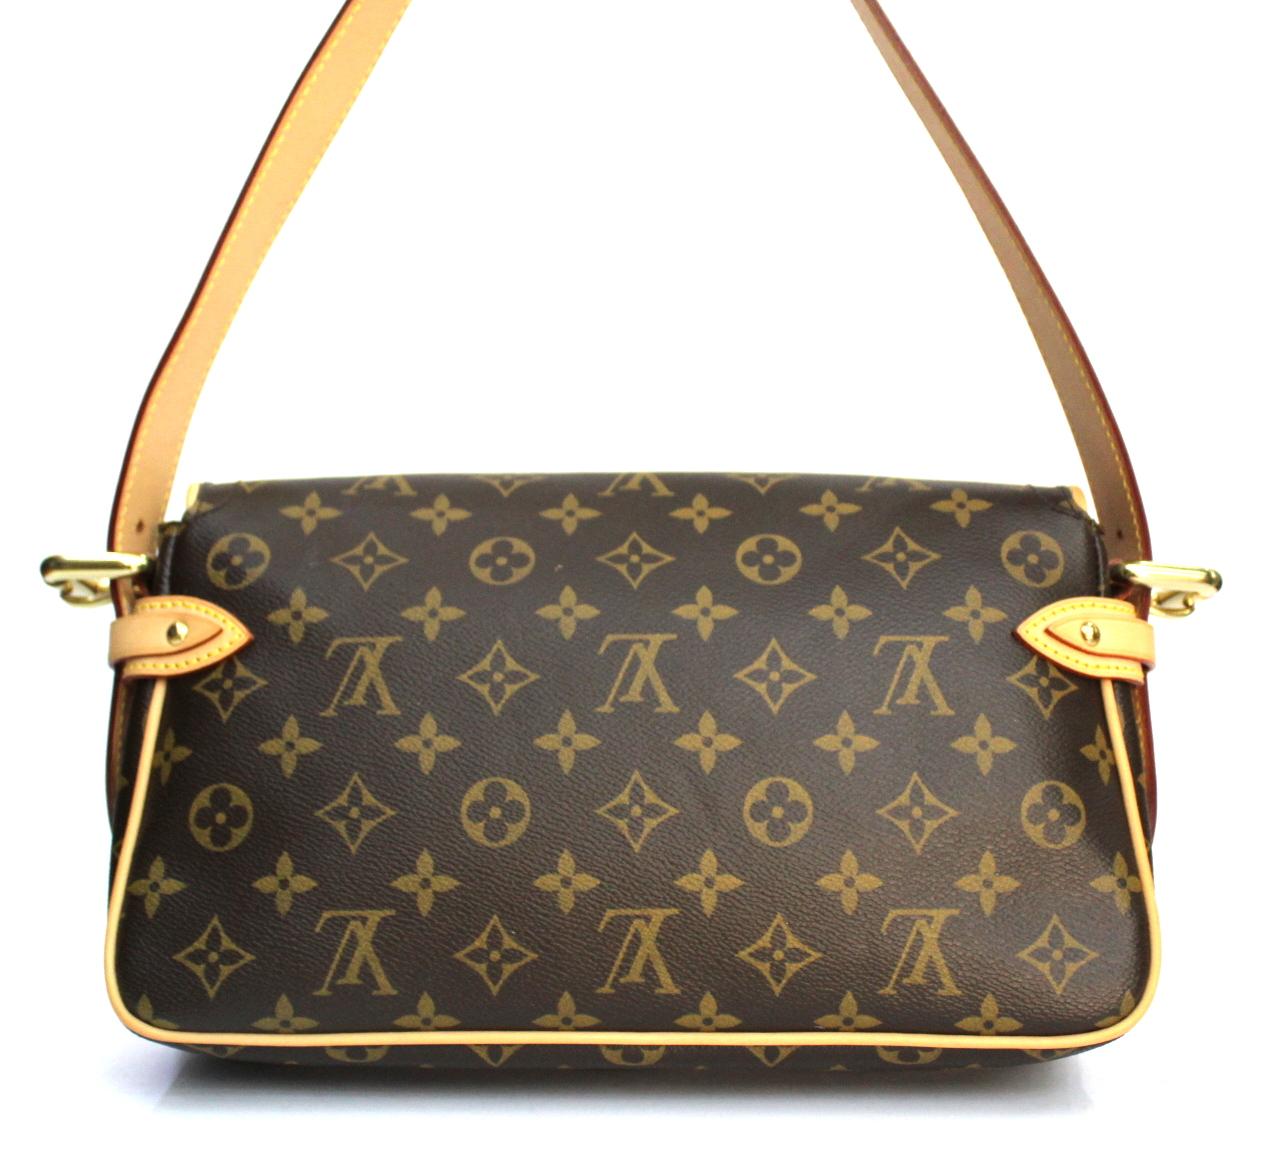 Louis Vuitton bag Hudson model in the classic monogram canvas with handle and cowhide details.Its large gold hardware and pressure pockets make this urban-chic bag.
Closure with buckle, internally capacious for the essential.
VERY GOOD CONDITION!

